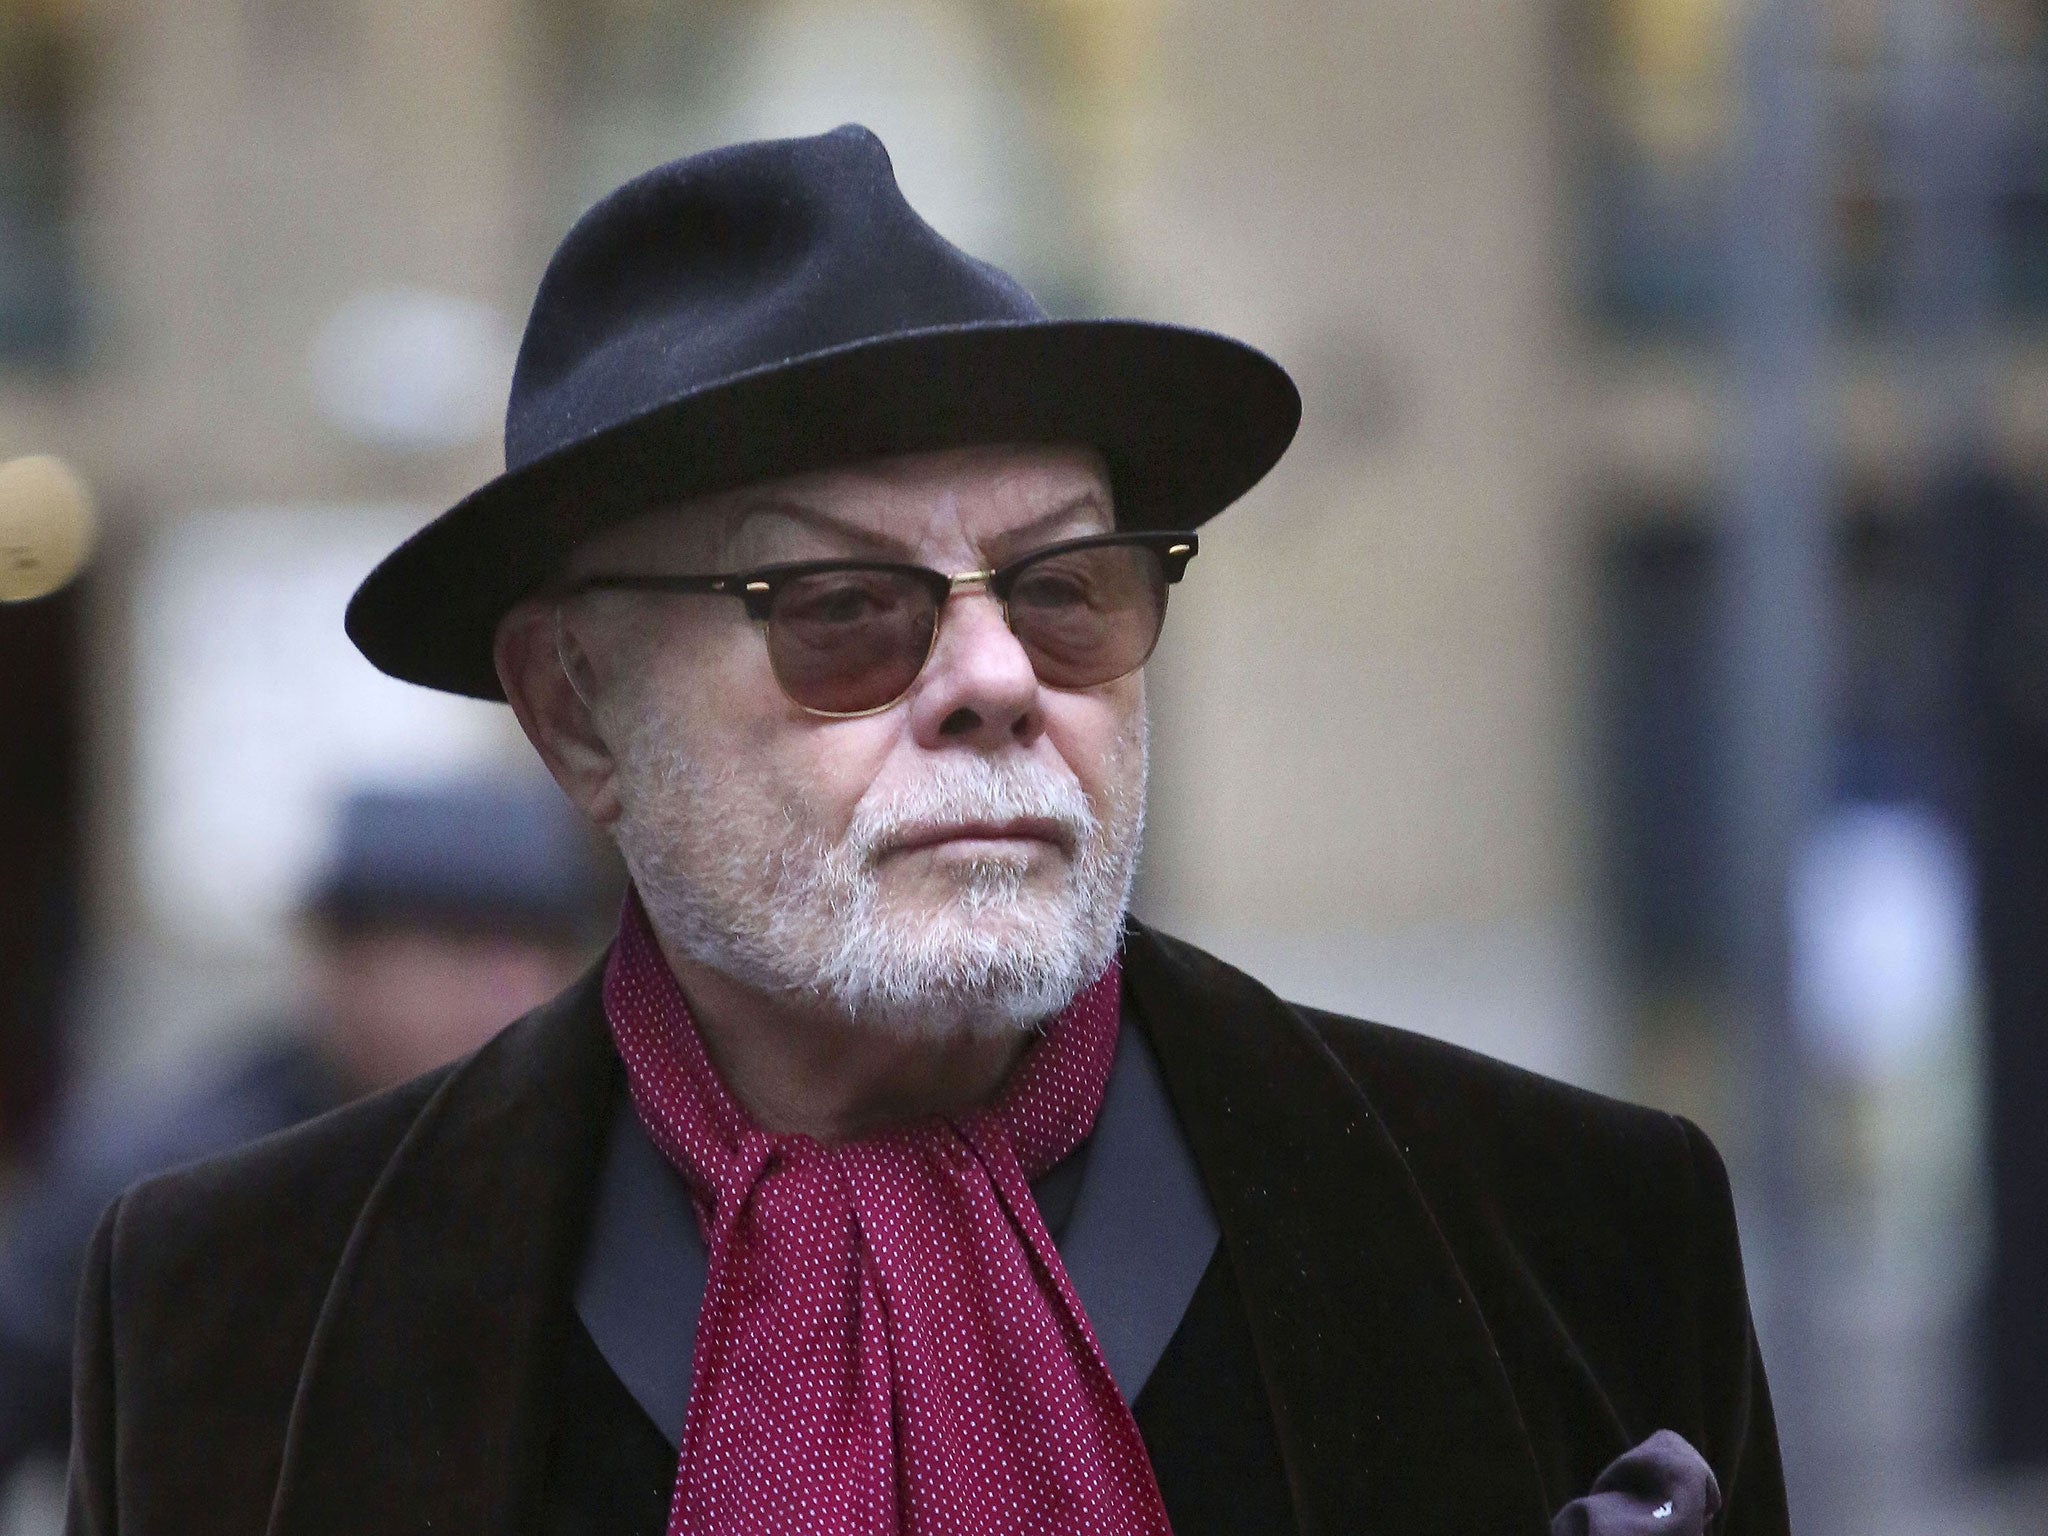 Former pop star Gary Glitter, real name Paul Gadd, arrives at Southwark Crown Court in London, 28 January, 2015